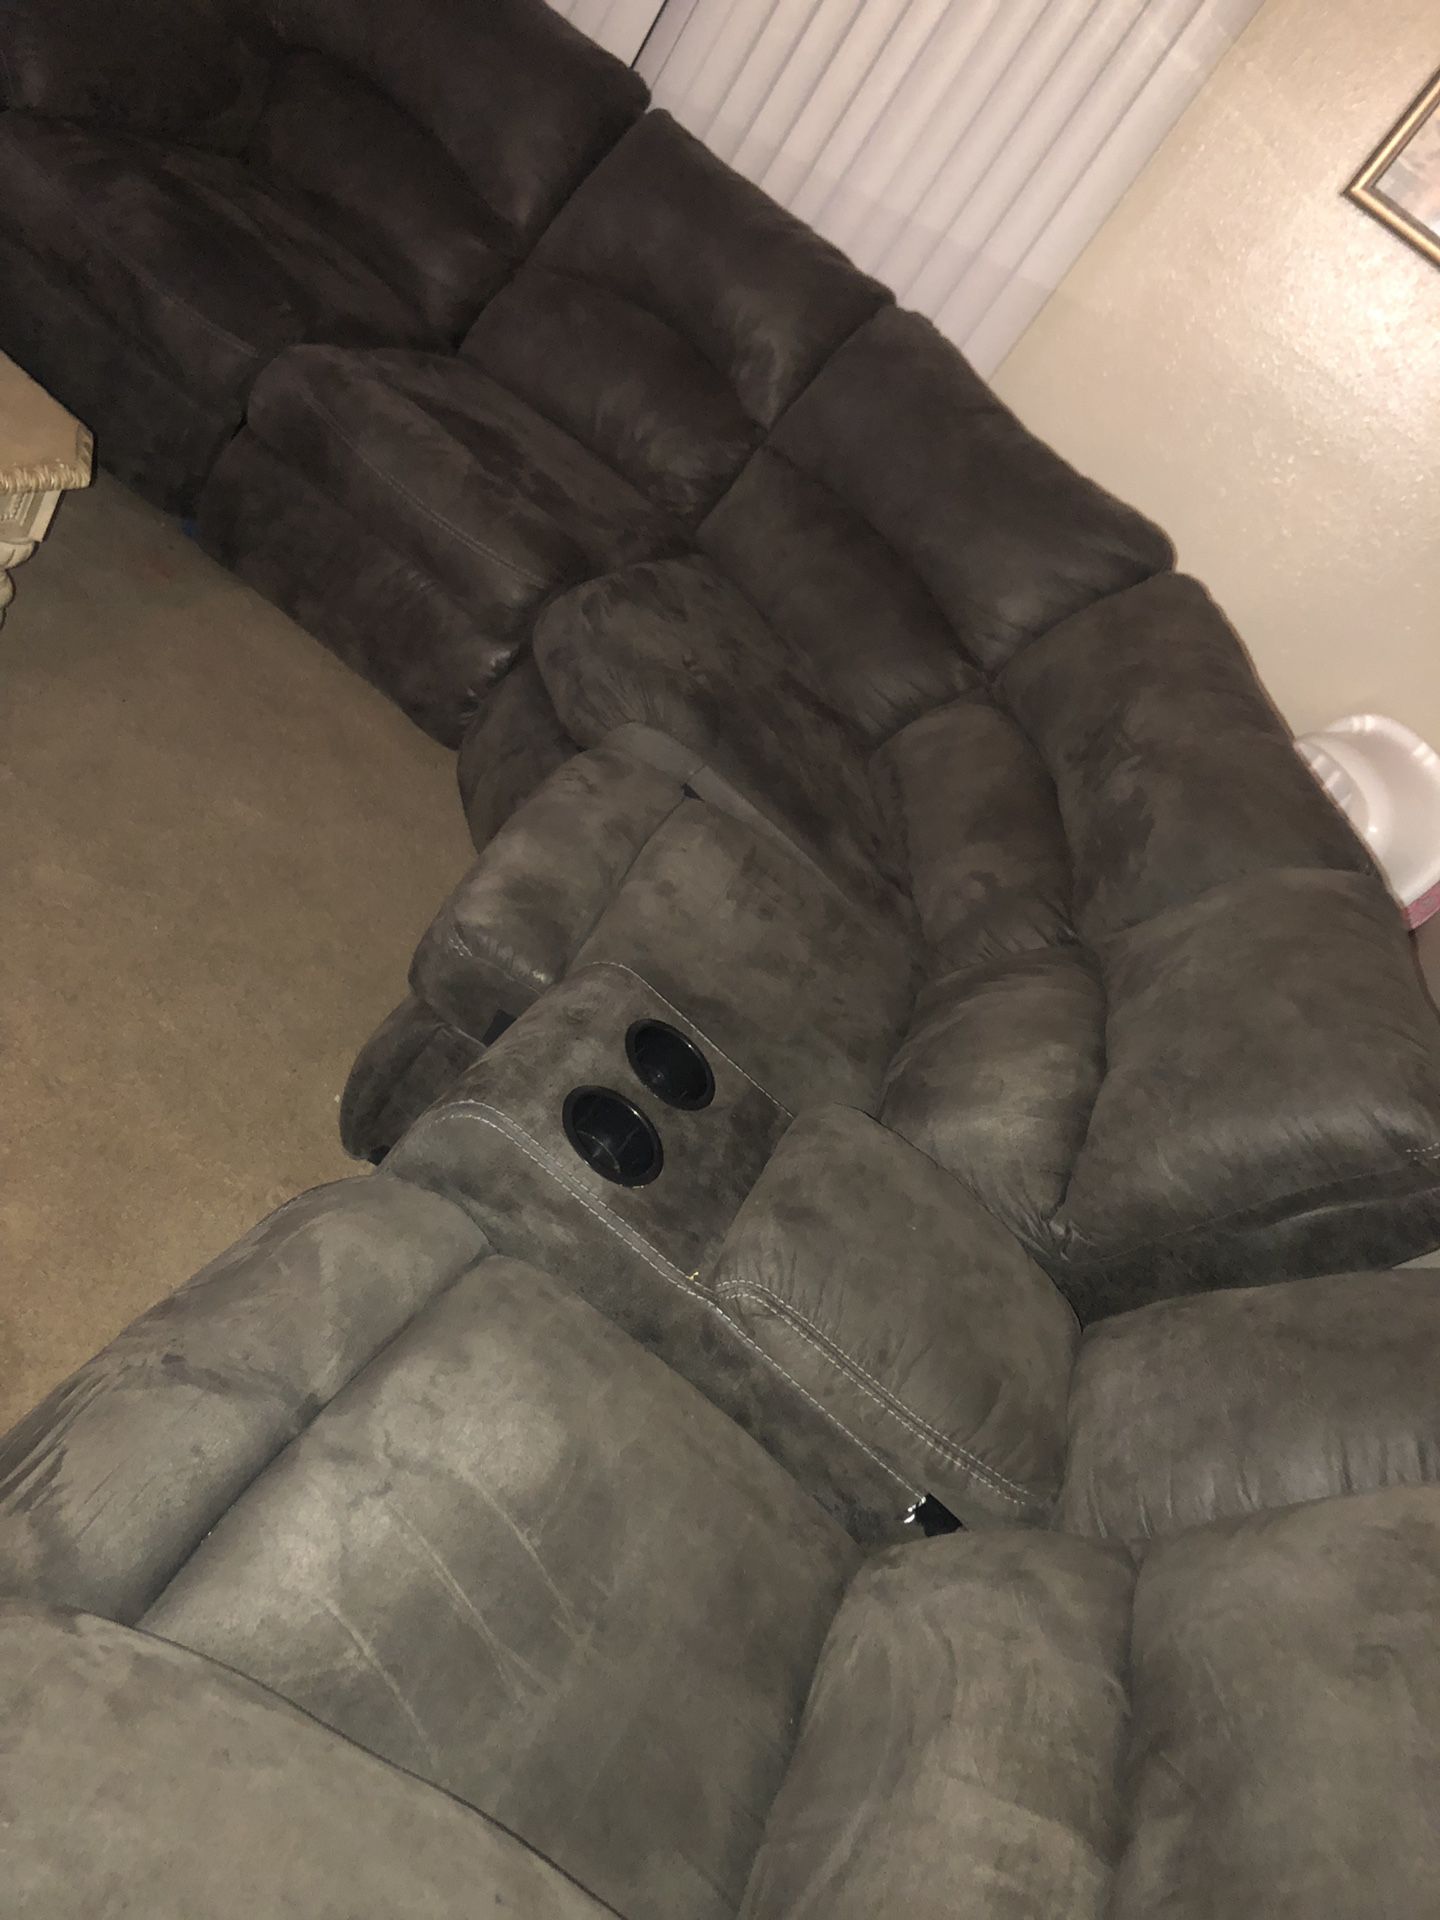 Nice “L” shape couches